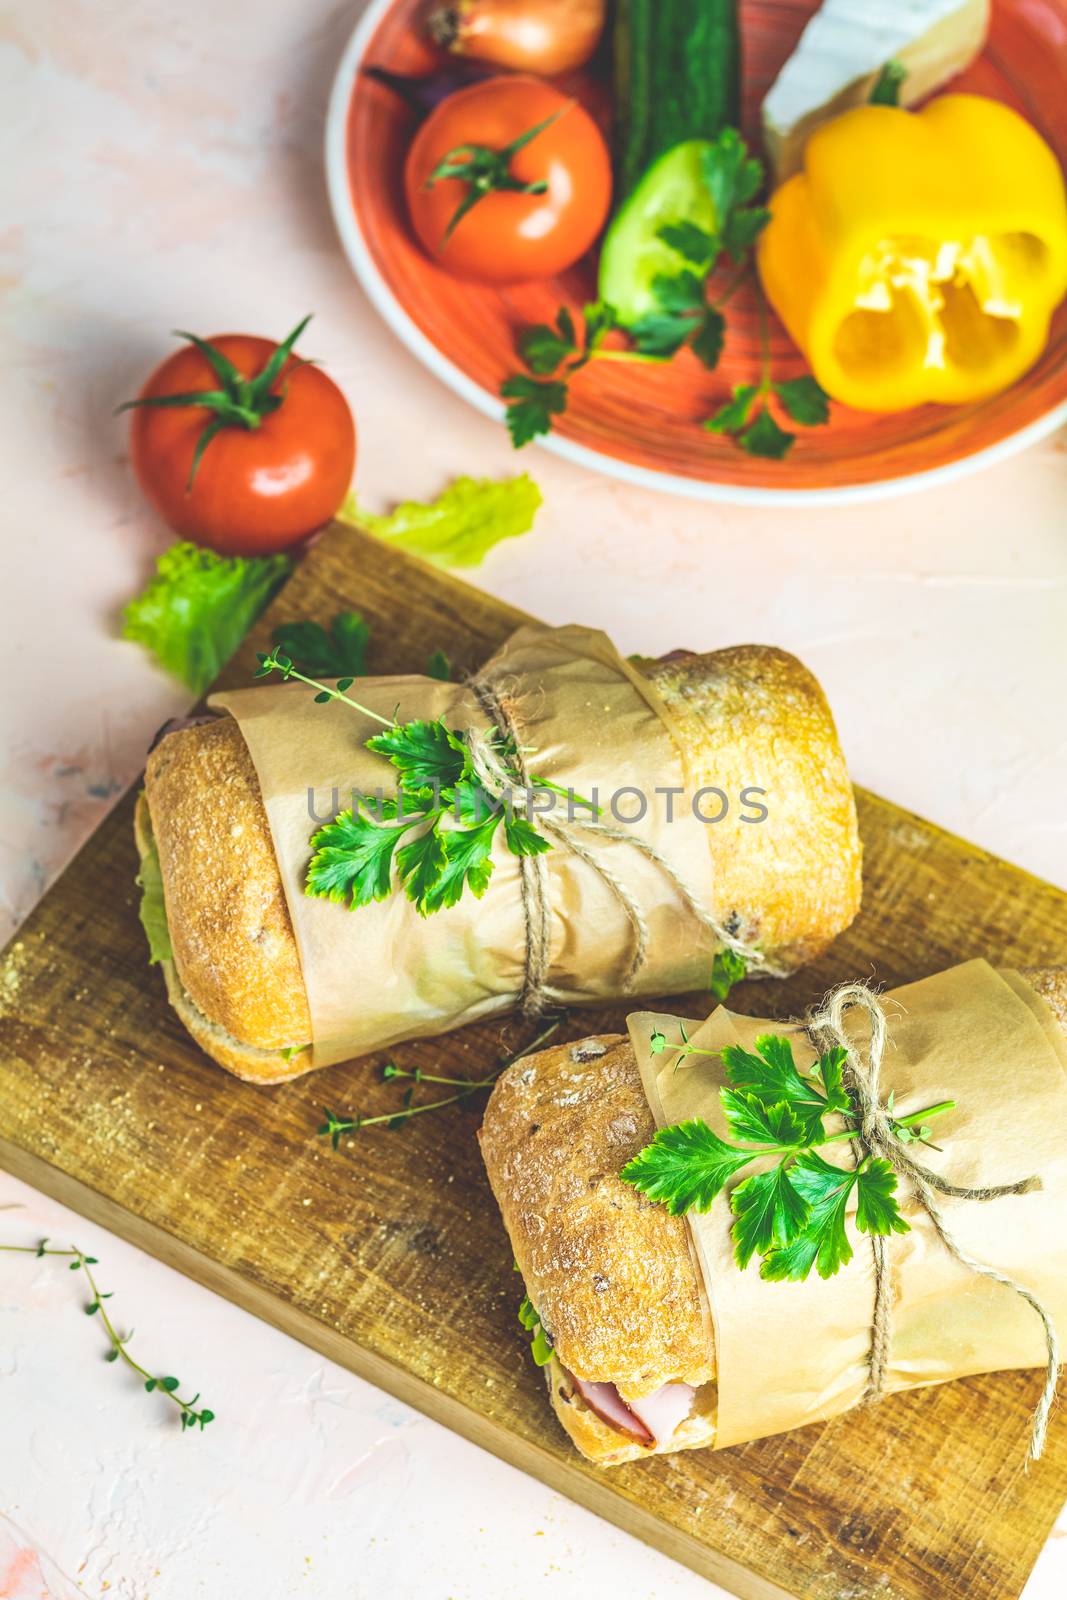 Ciabatta sandwich with ham, tomato, cheese, pepper, onion and salad on wooden cutting board with ingredients.